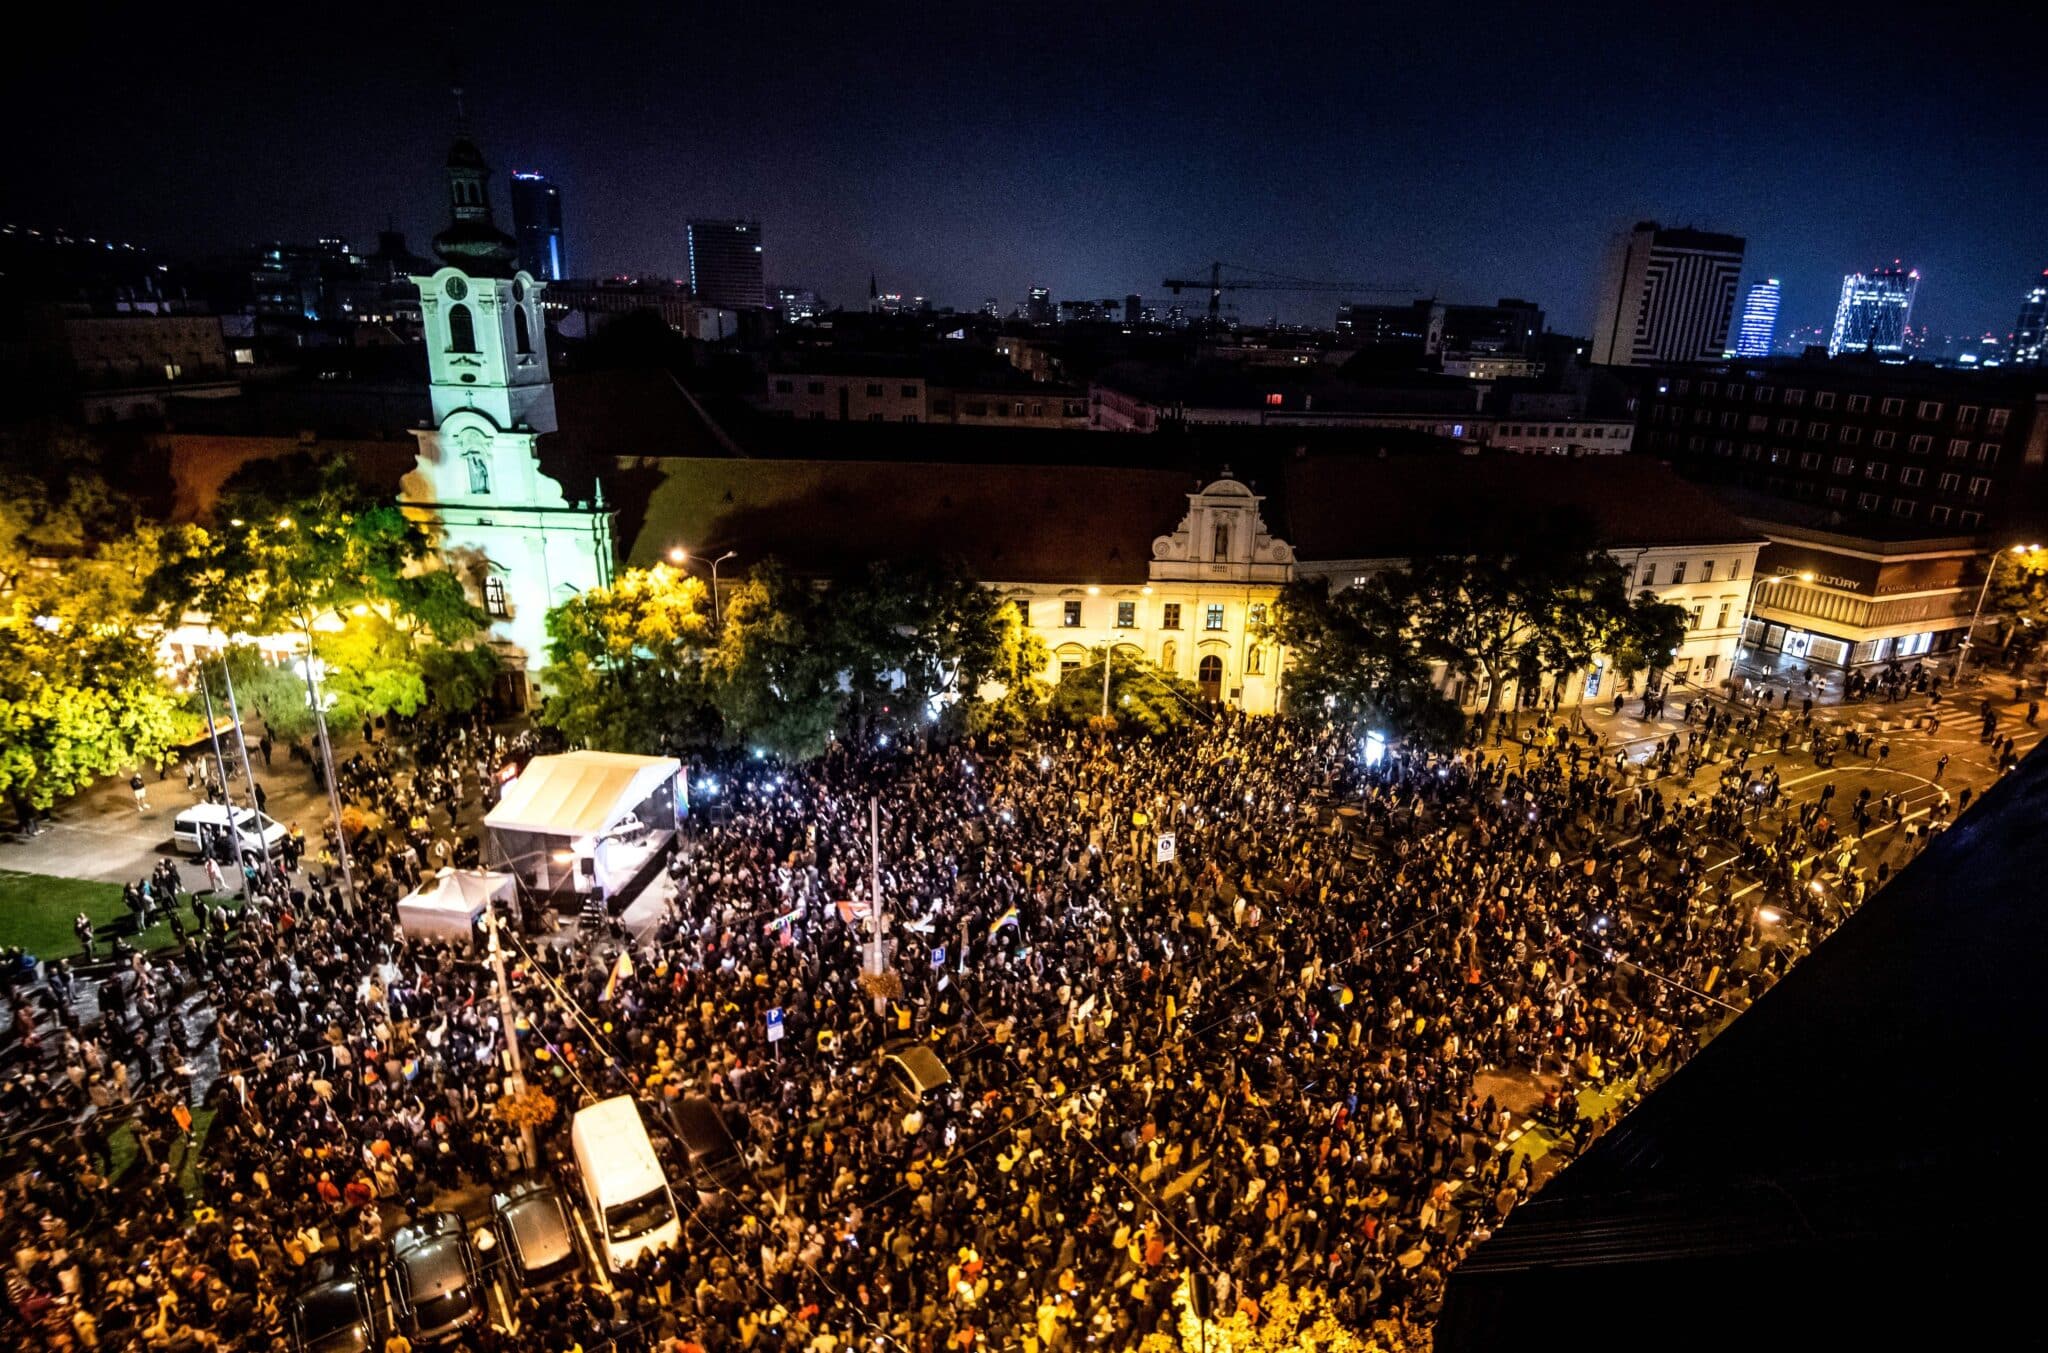 Slovakia shooting: Participants gather during a vigil in Bratislava to mourn two victims.